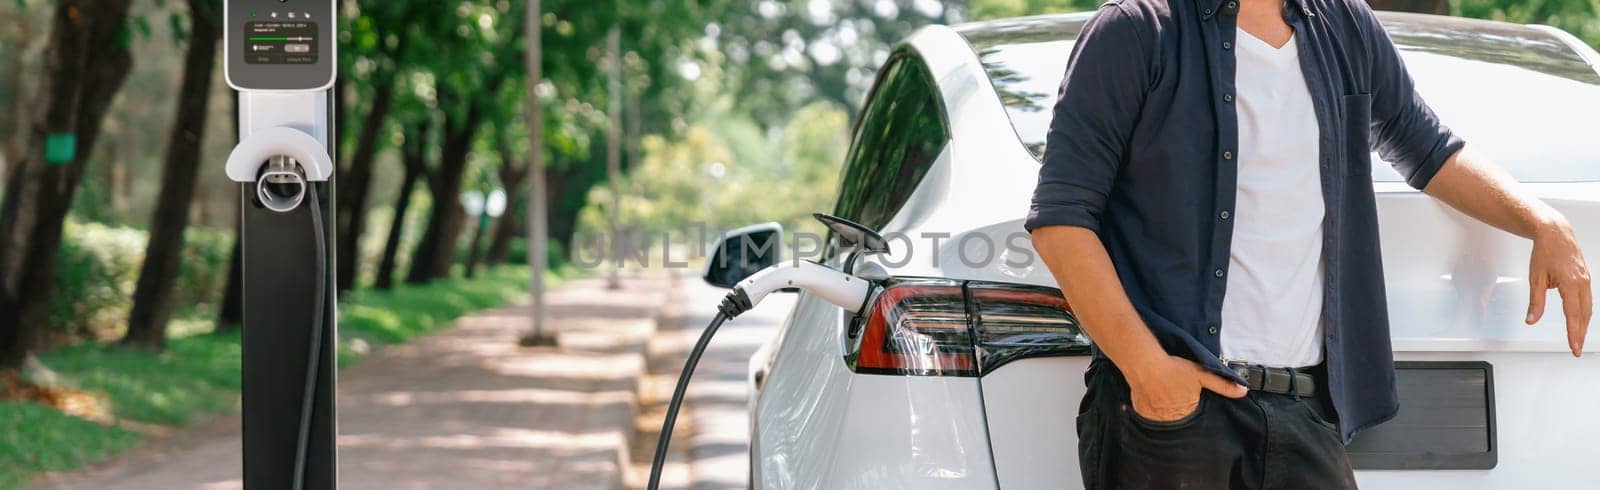 Man recharging battery for electric car during road trip. Exalt by biancoblue